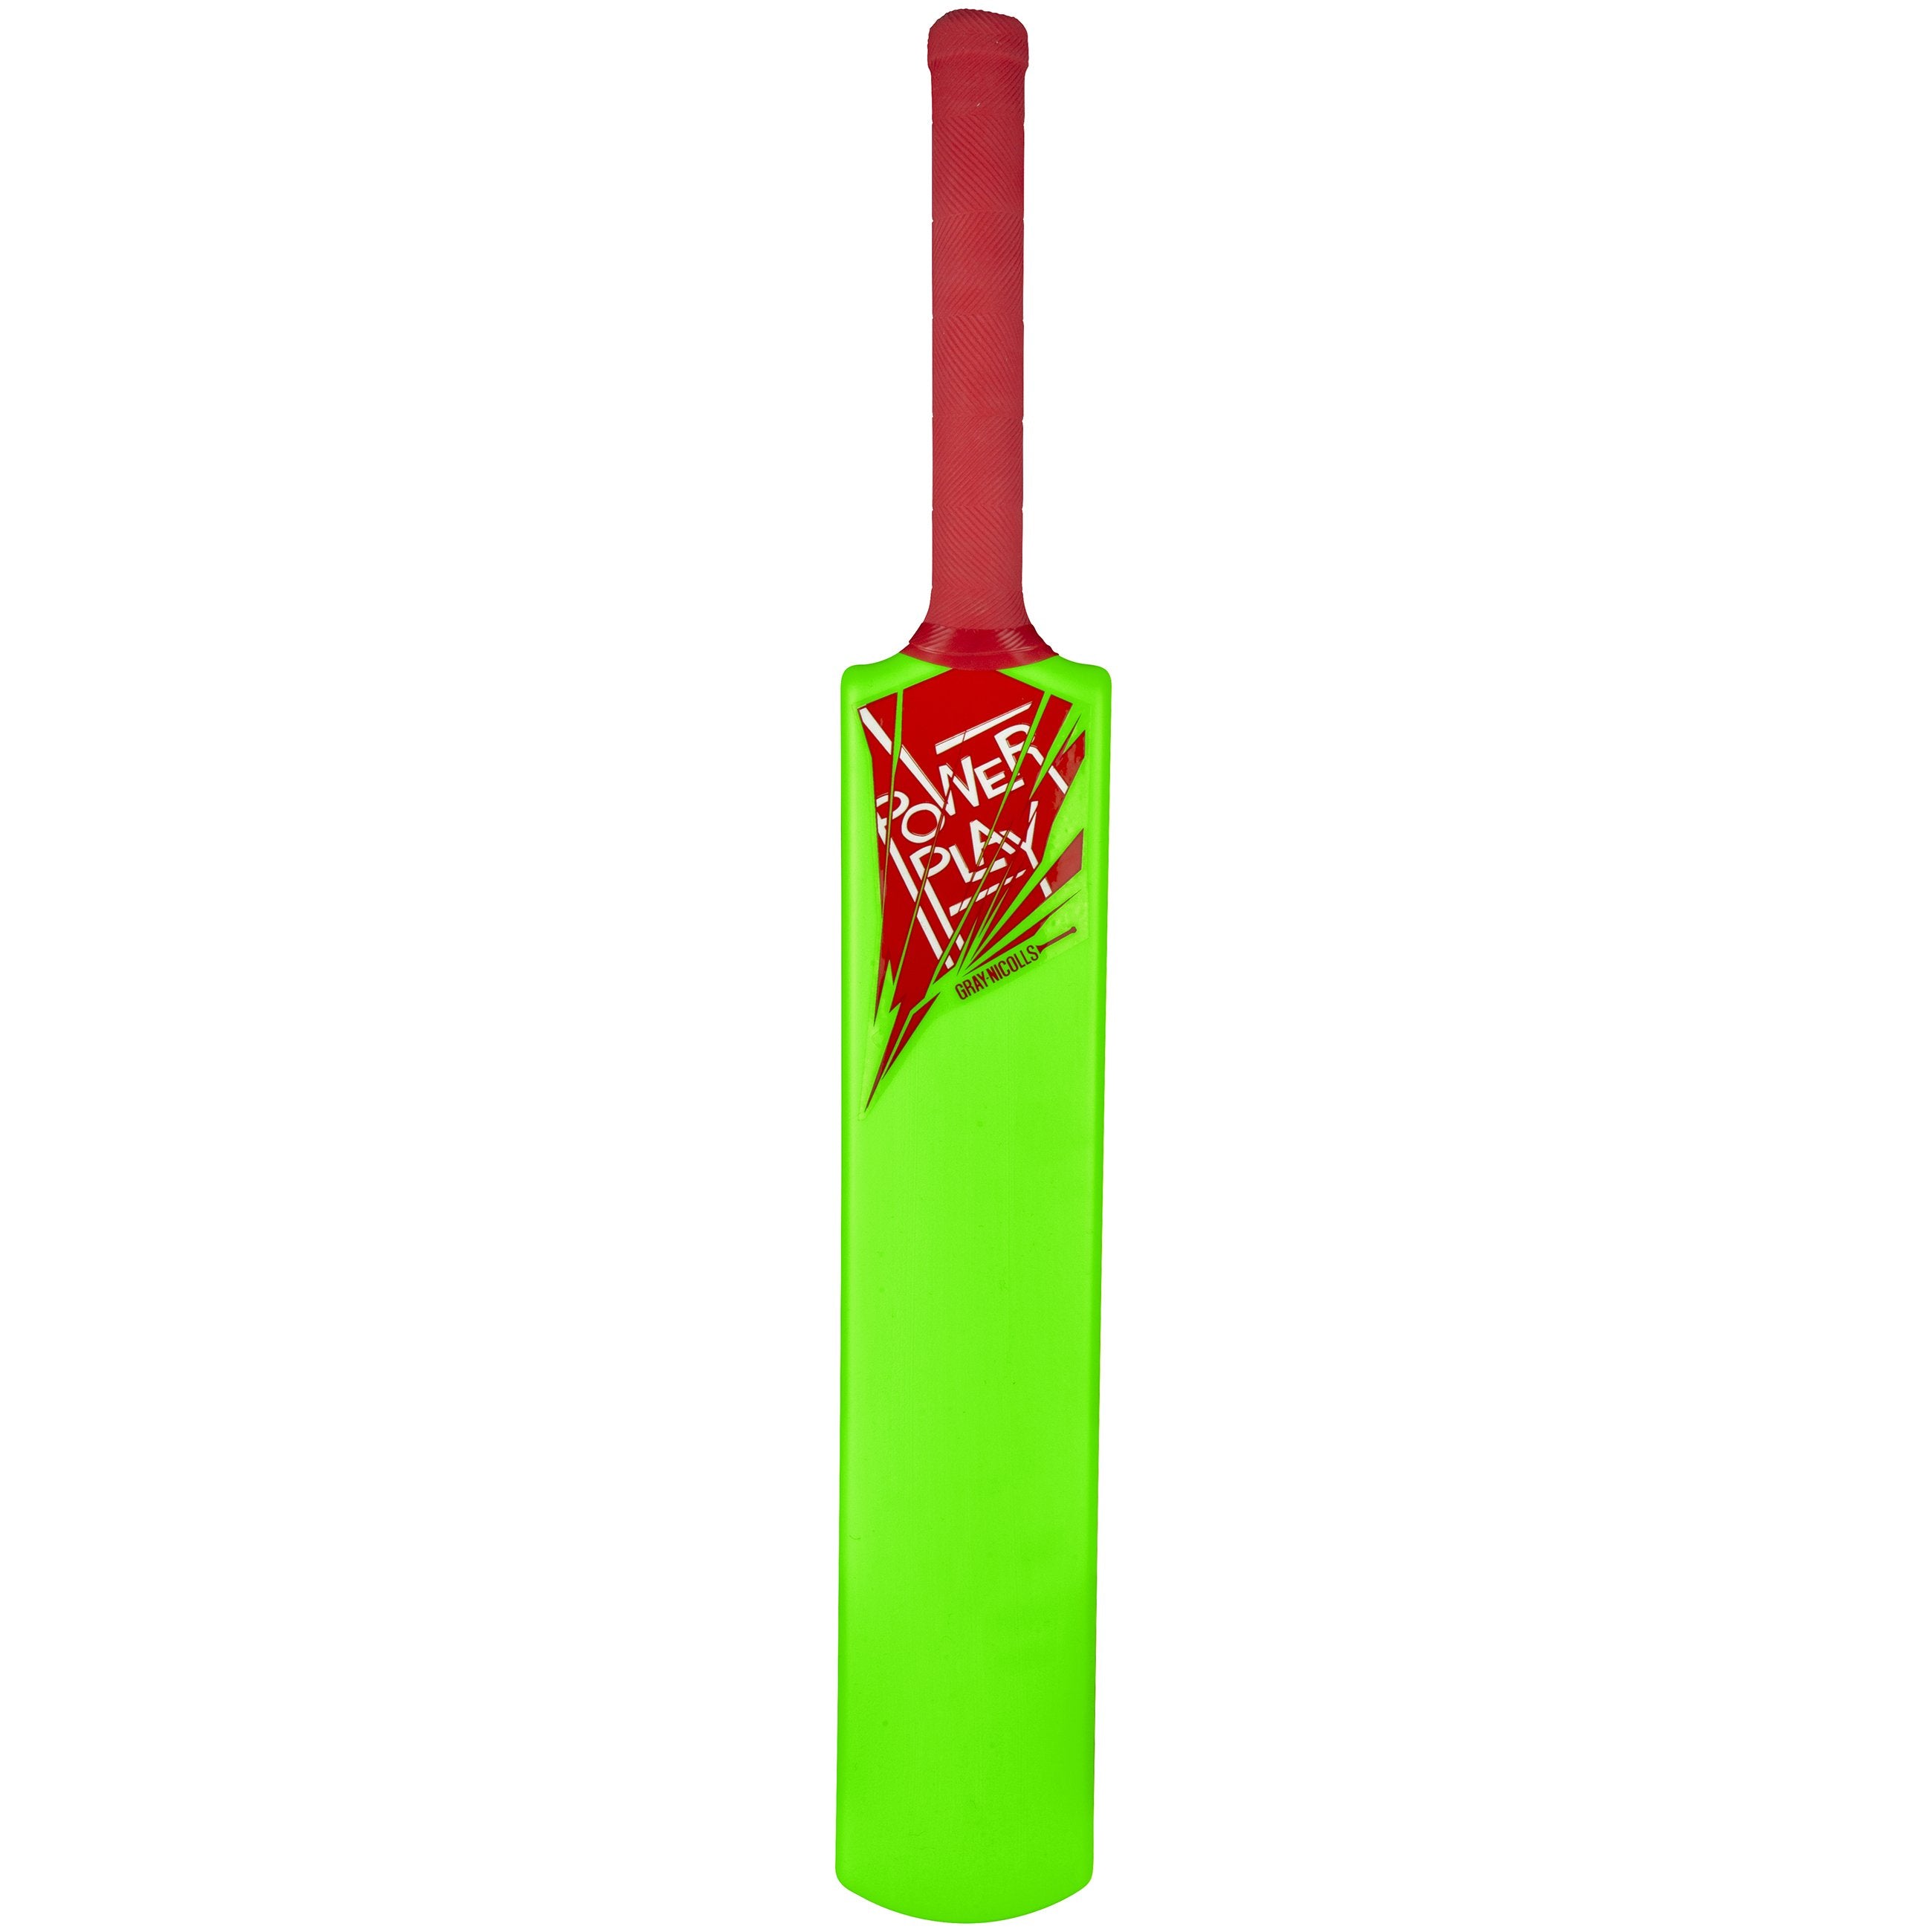 2600 CNBA20 5802553 Plastic Power Play Bat Green Size 3 Front